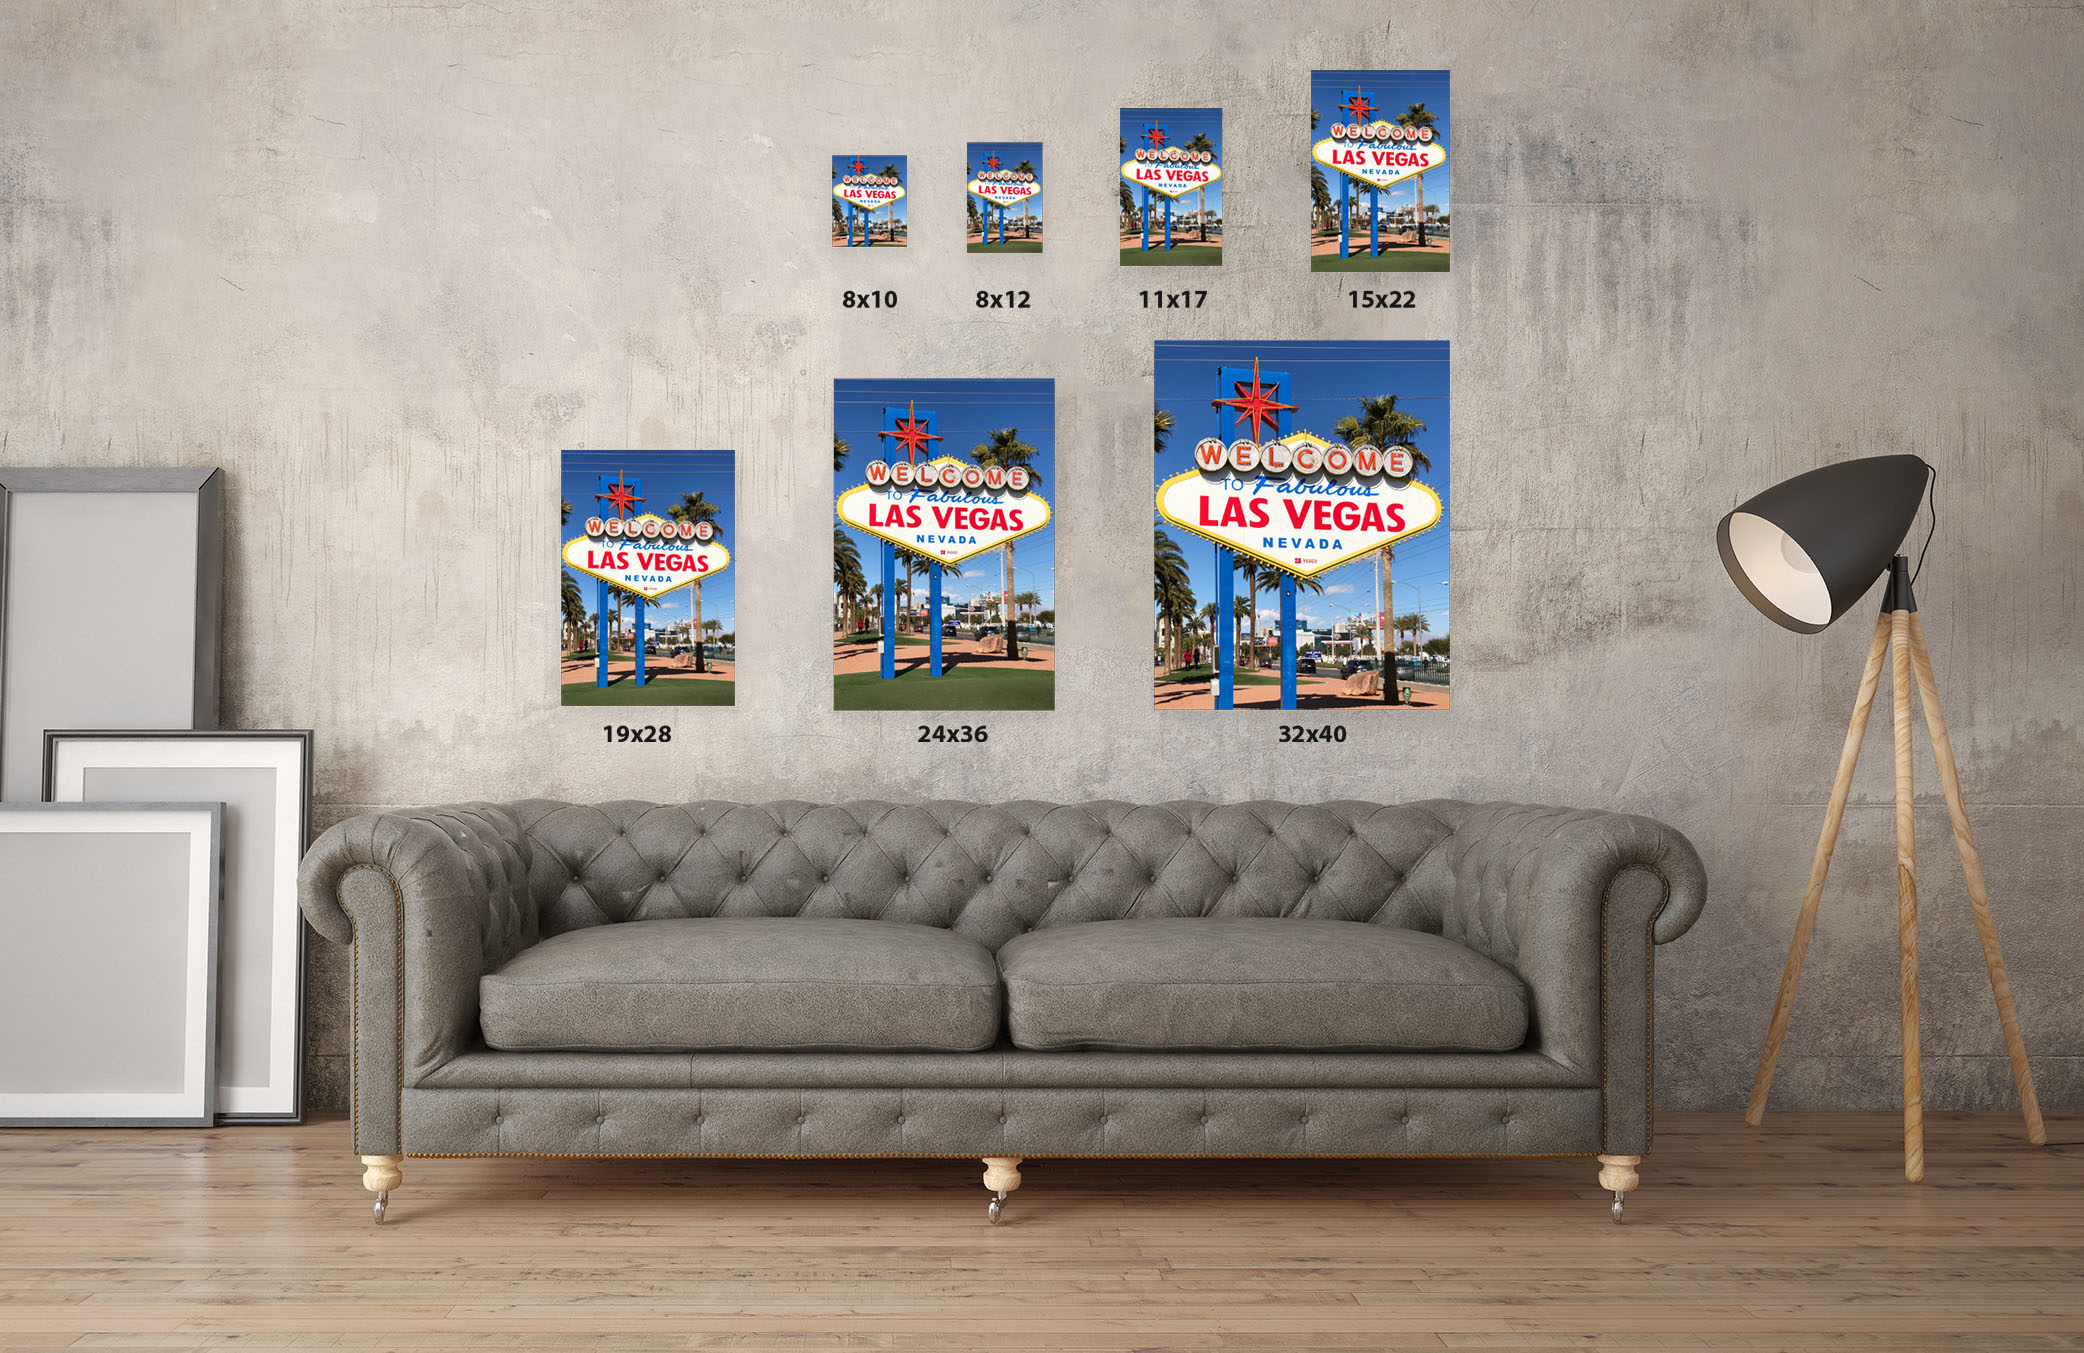 Awkward Styles Welcome to Fabulous Las Vegas Sign Poster Artwork Las Vegas Unframed Decor for Office Welcome to Fabulous Las Vegas Poster Wall Art Printed Photo American Poster Stylish Decor Ideas - image 3 of 3